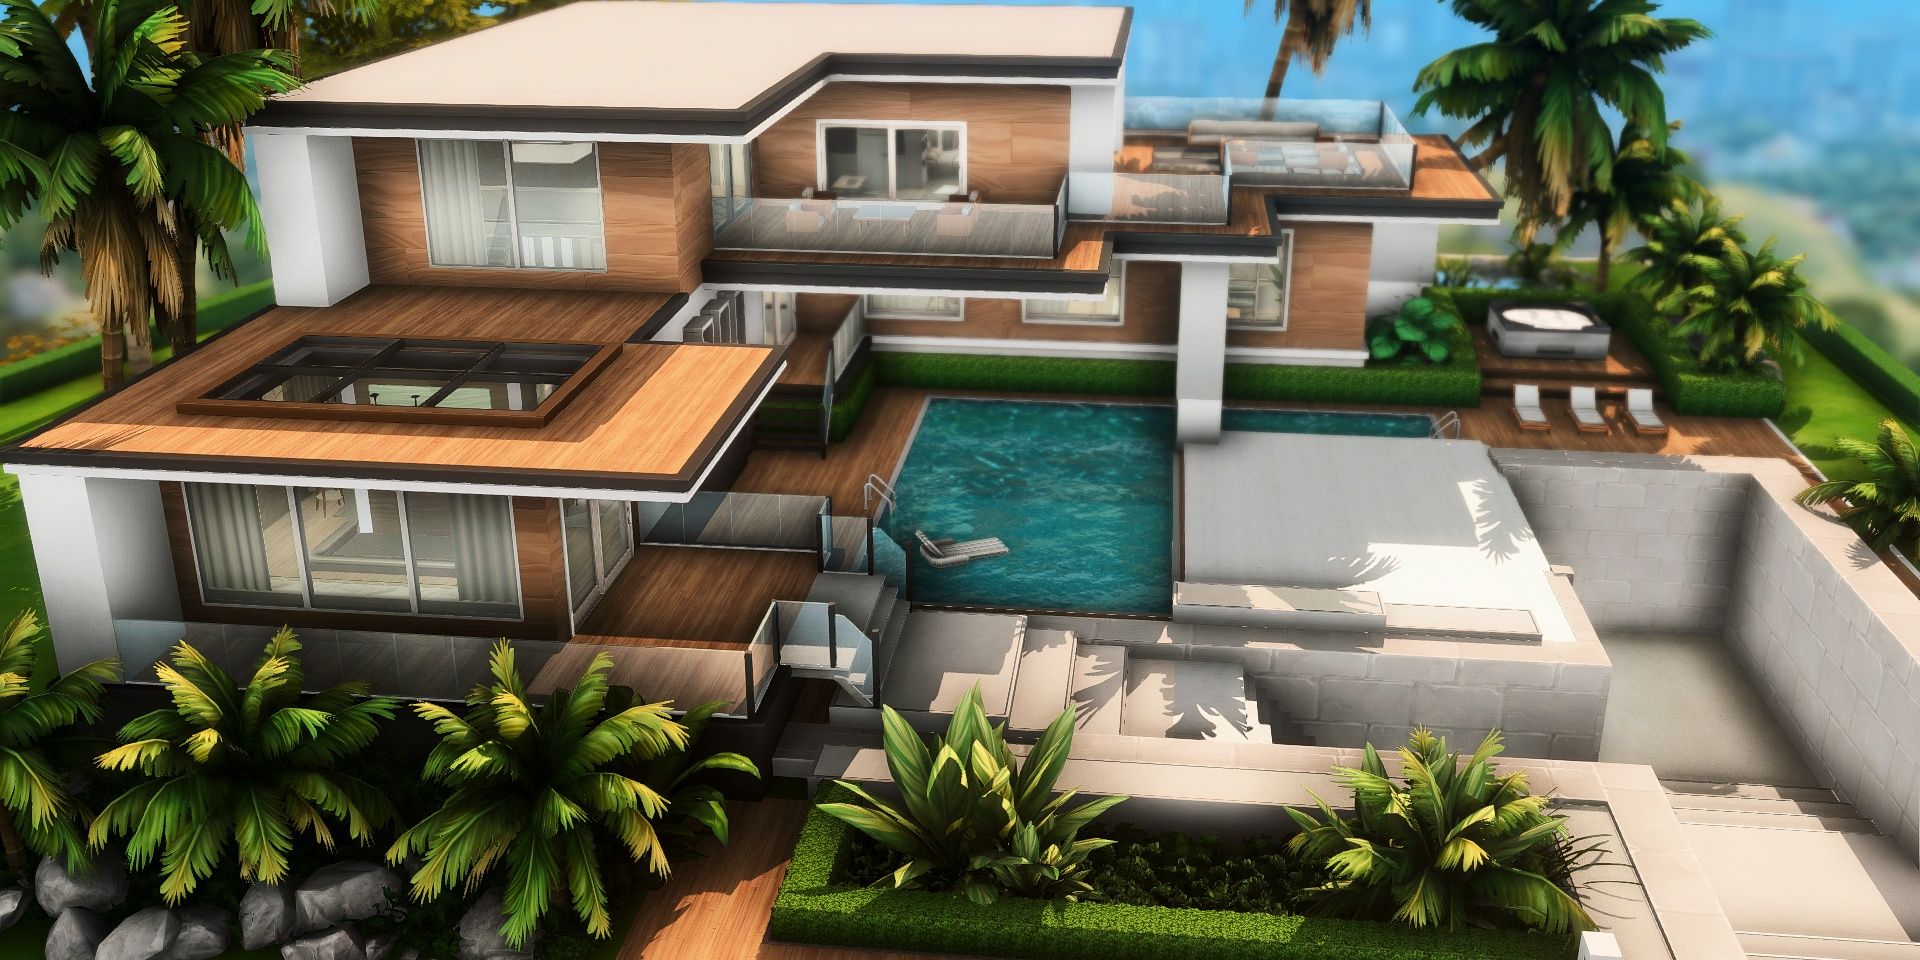 Modern mansion mod for The Sims 4